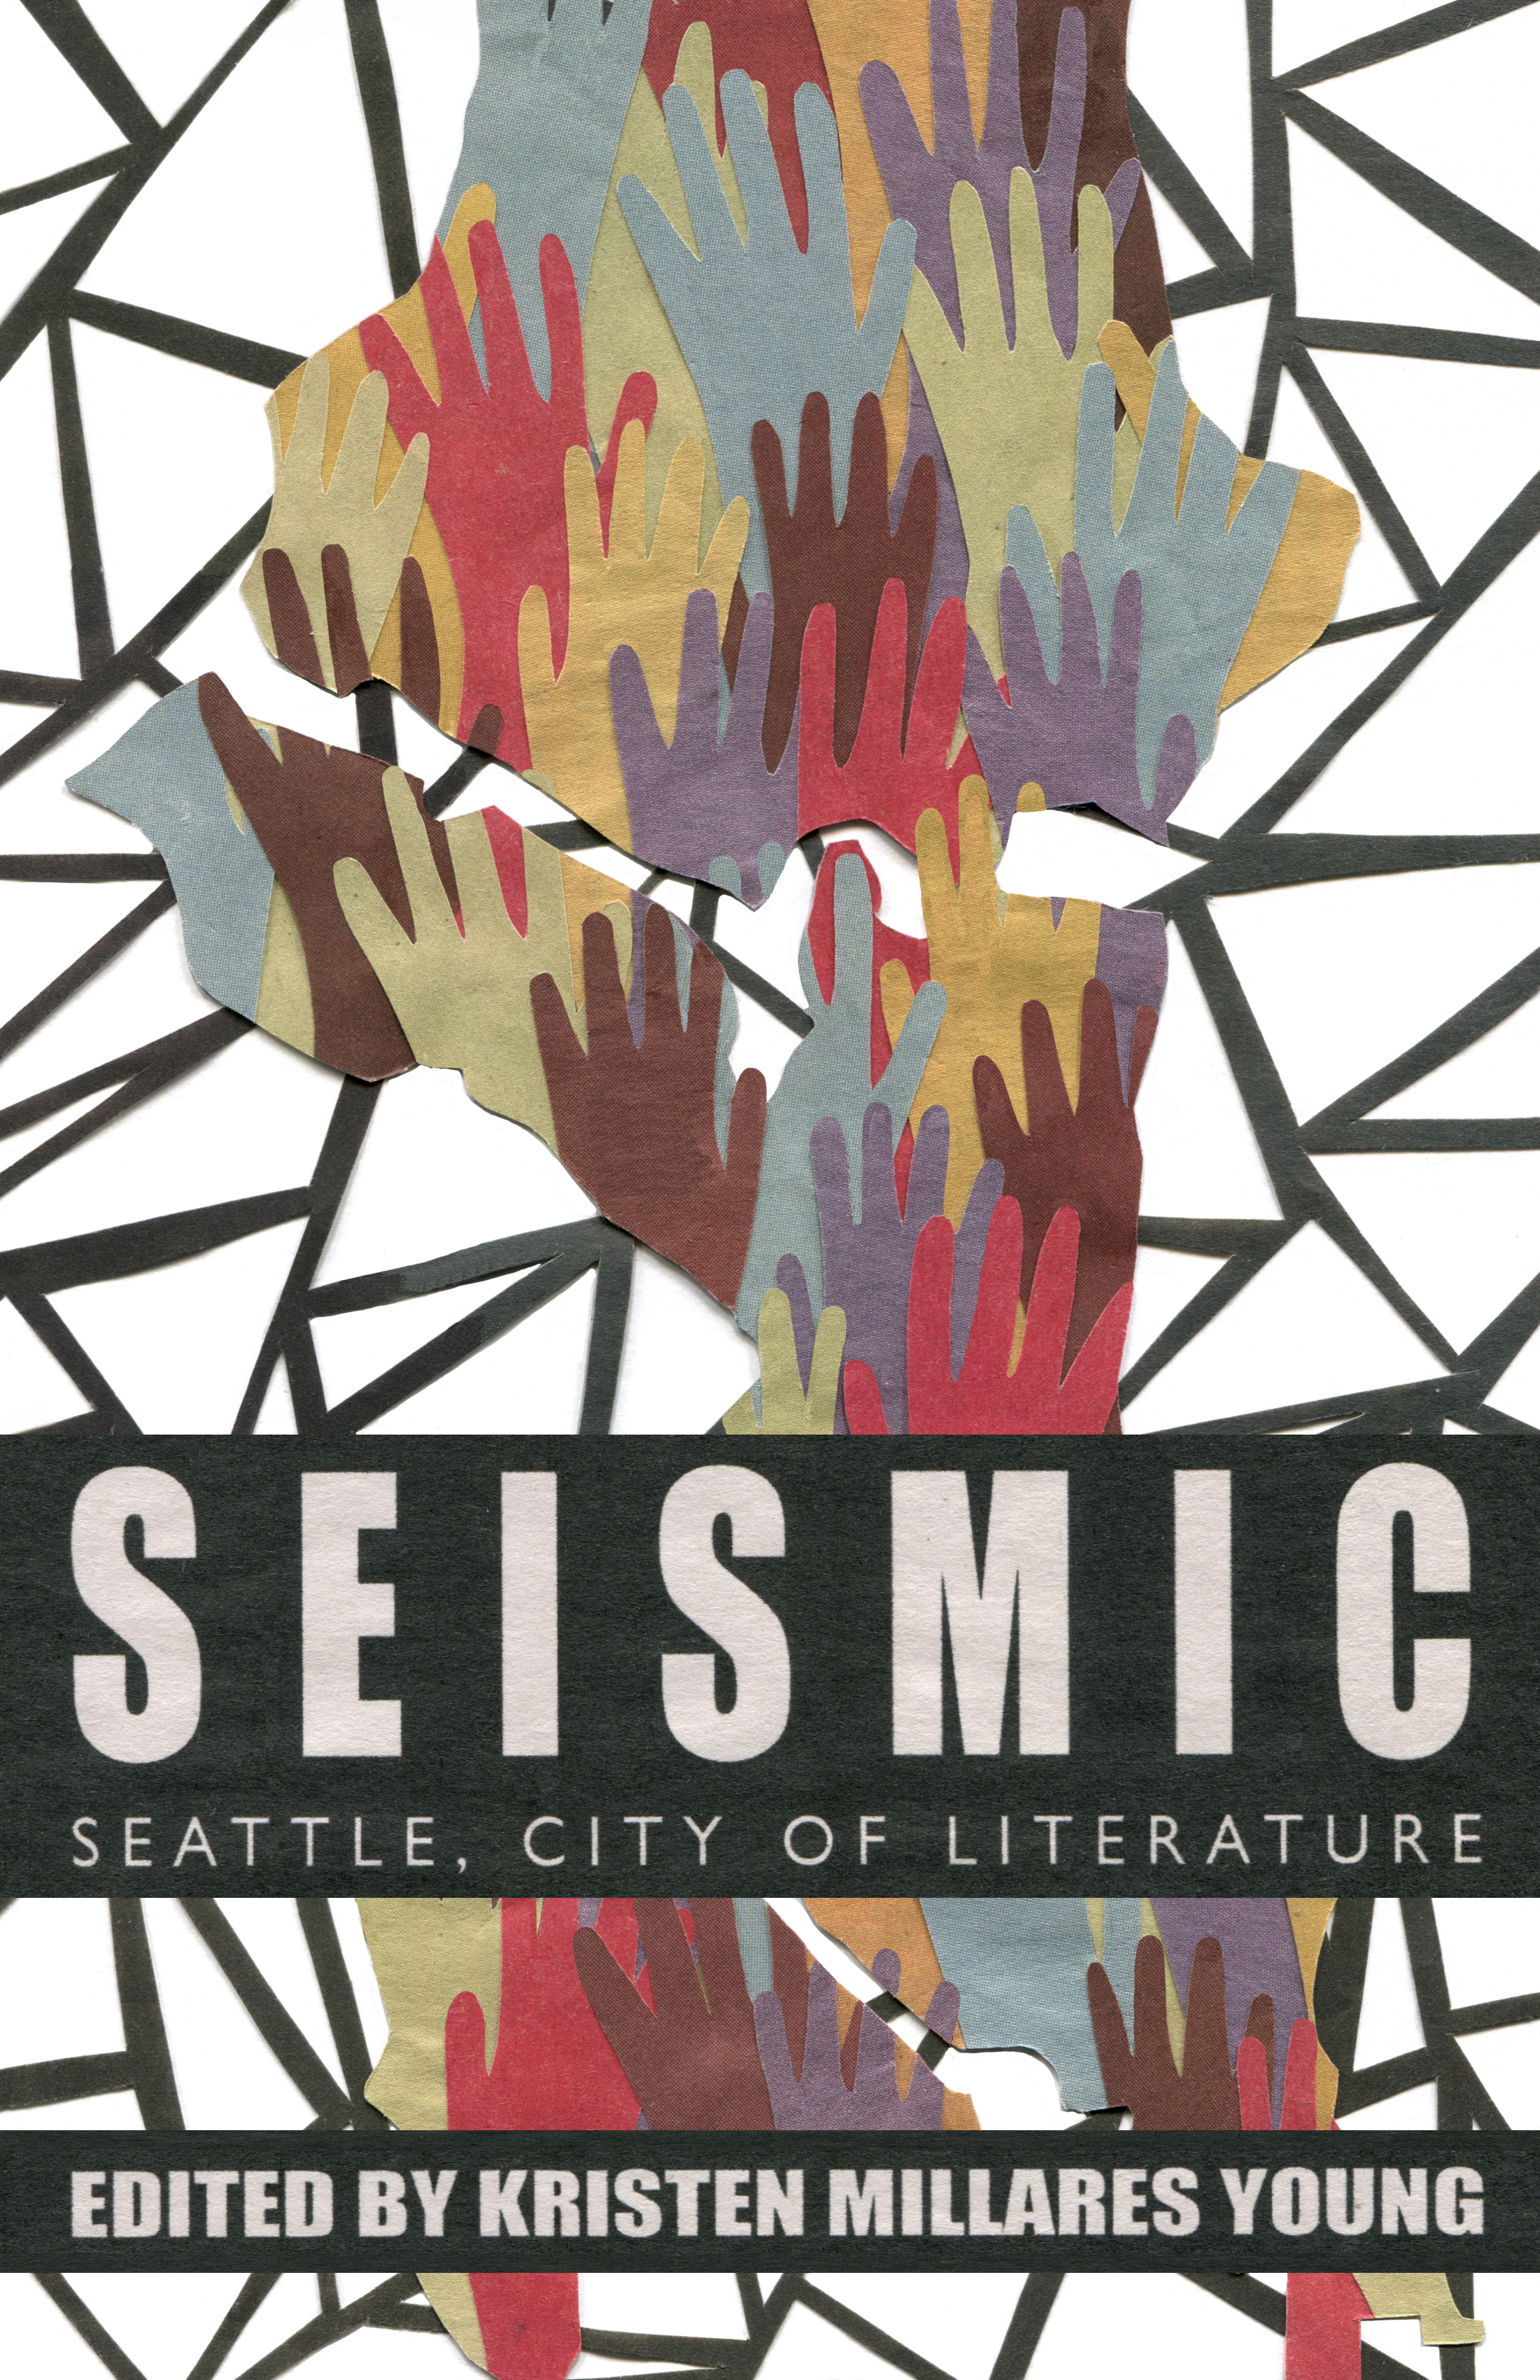 The cover of Seismic